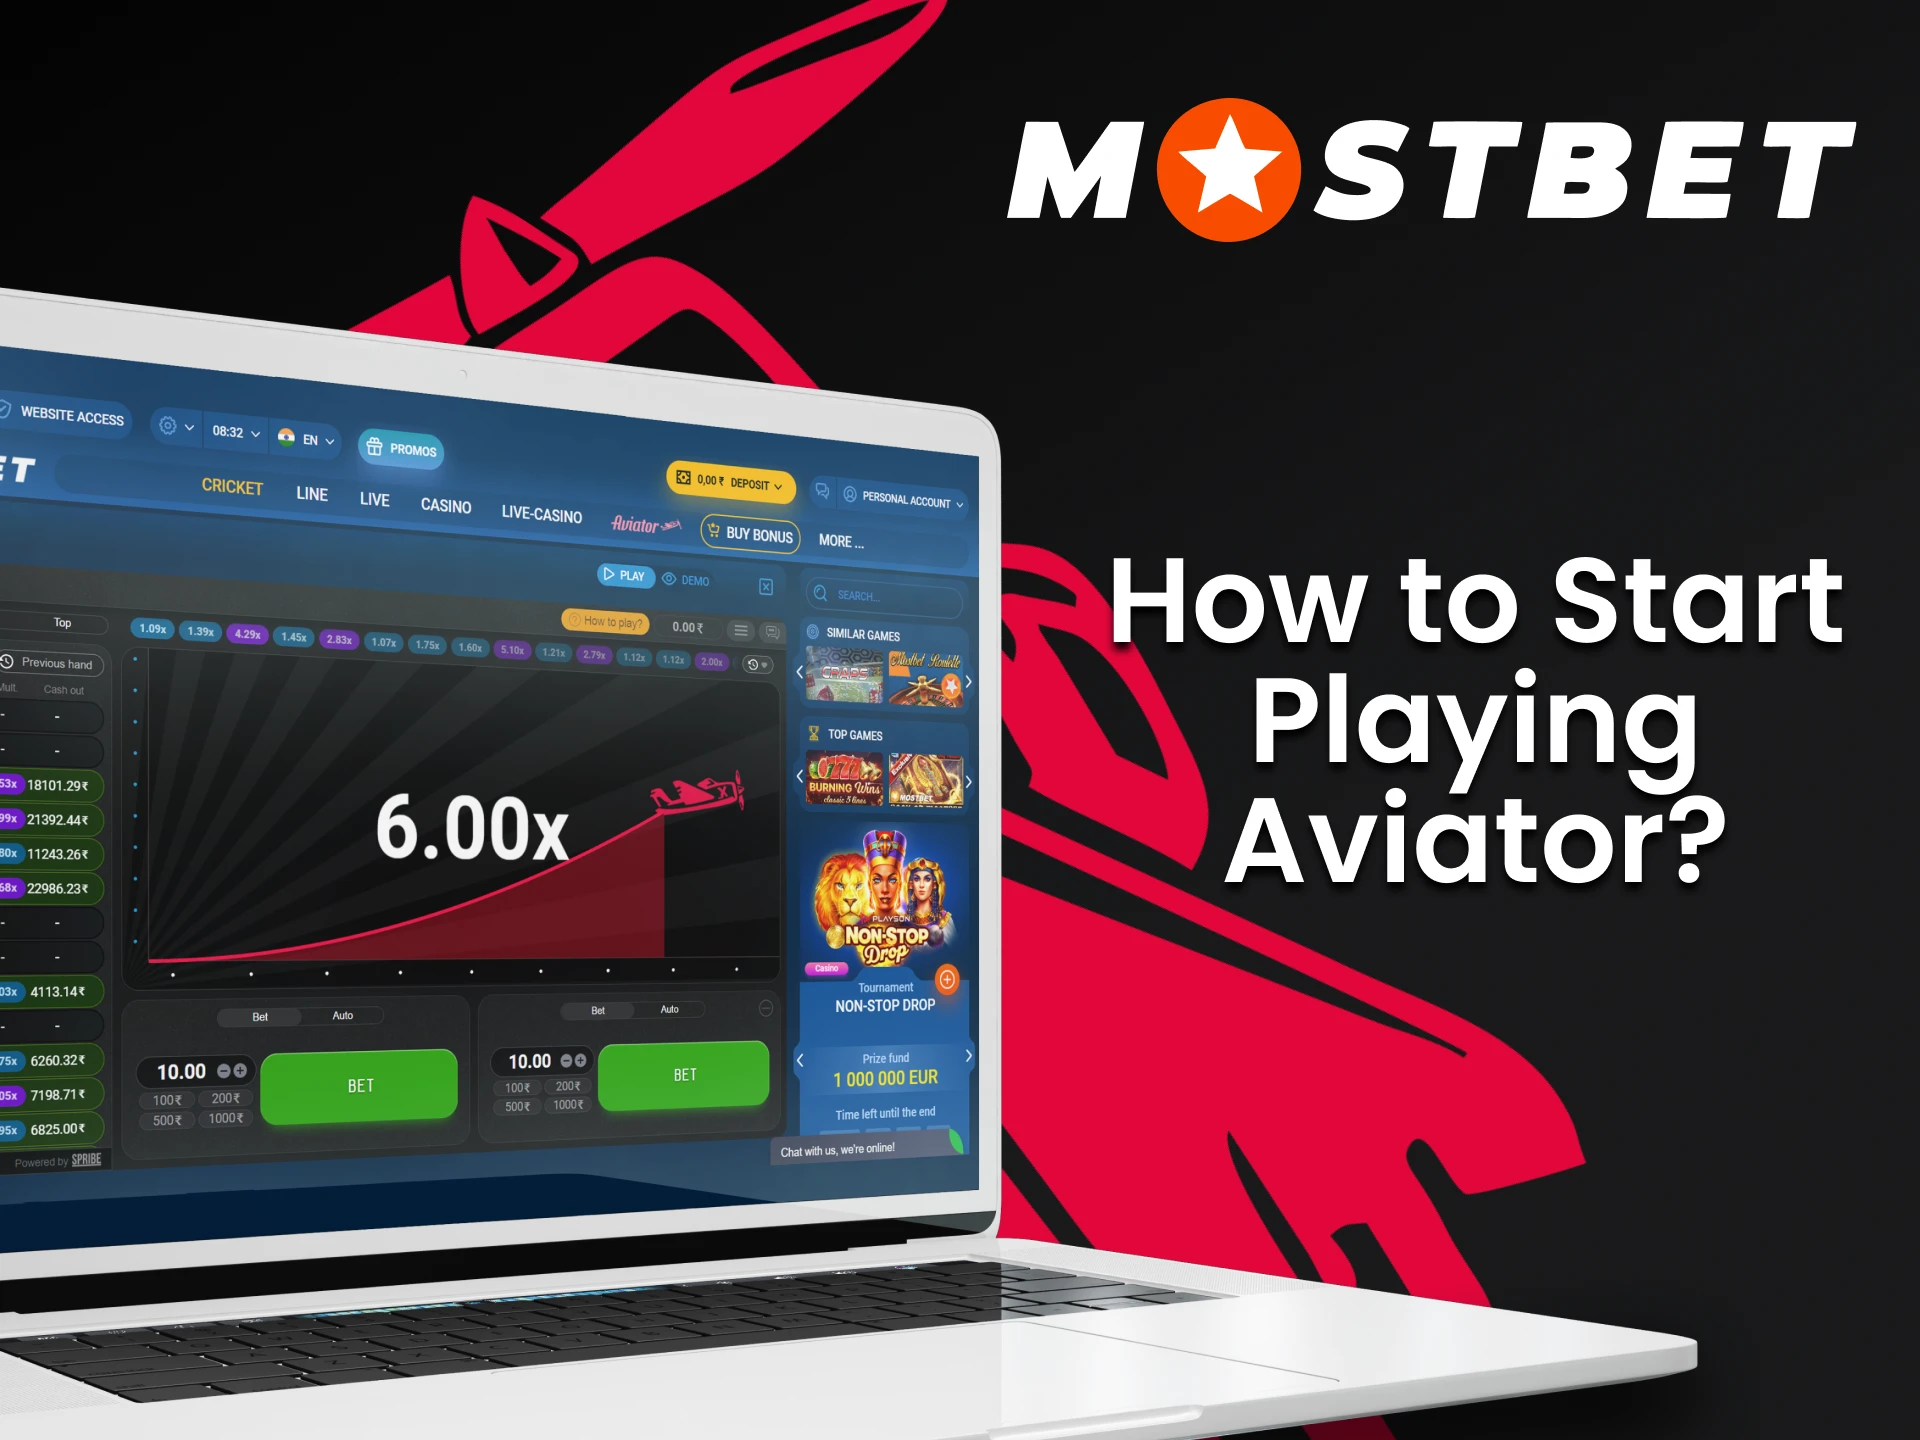 Create an account on Mostbet to play Aviator.